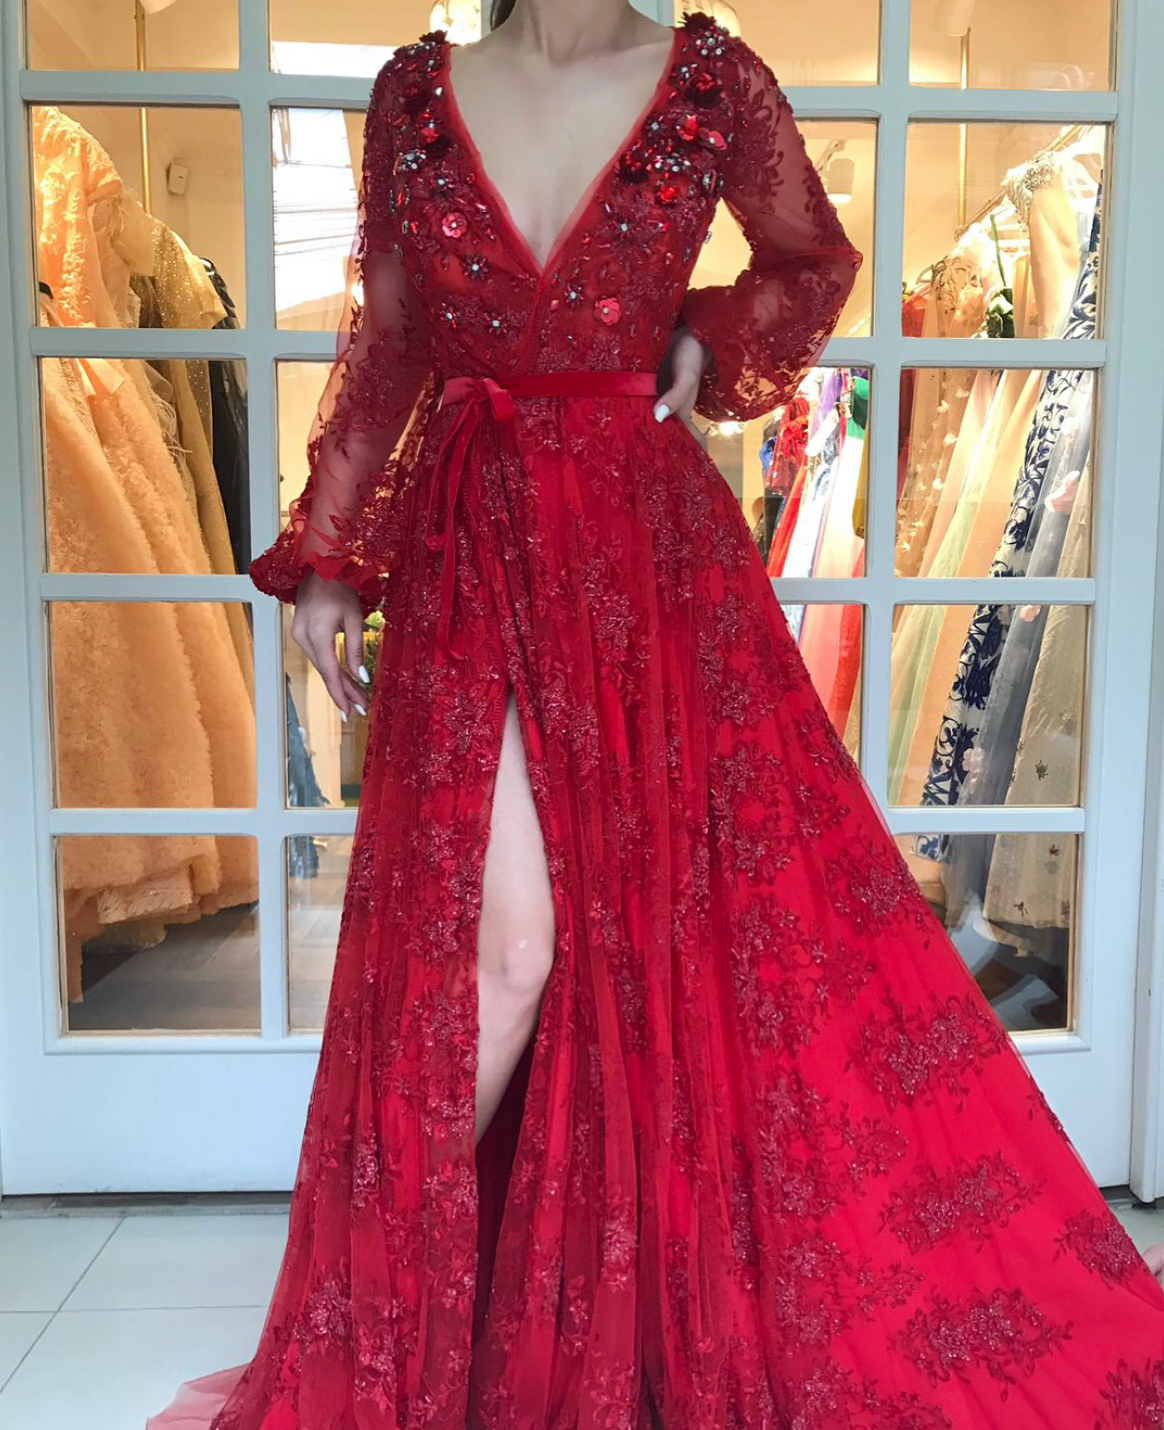 Red A-Line dress with long sleeves, v-neck and embroidery